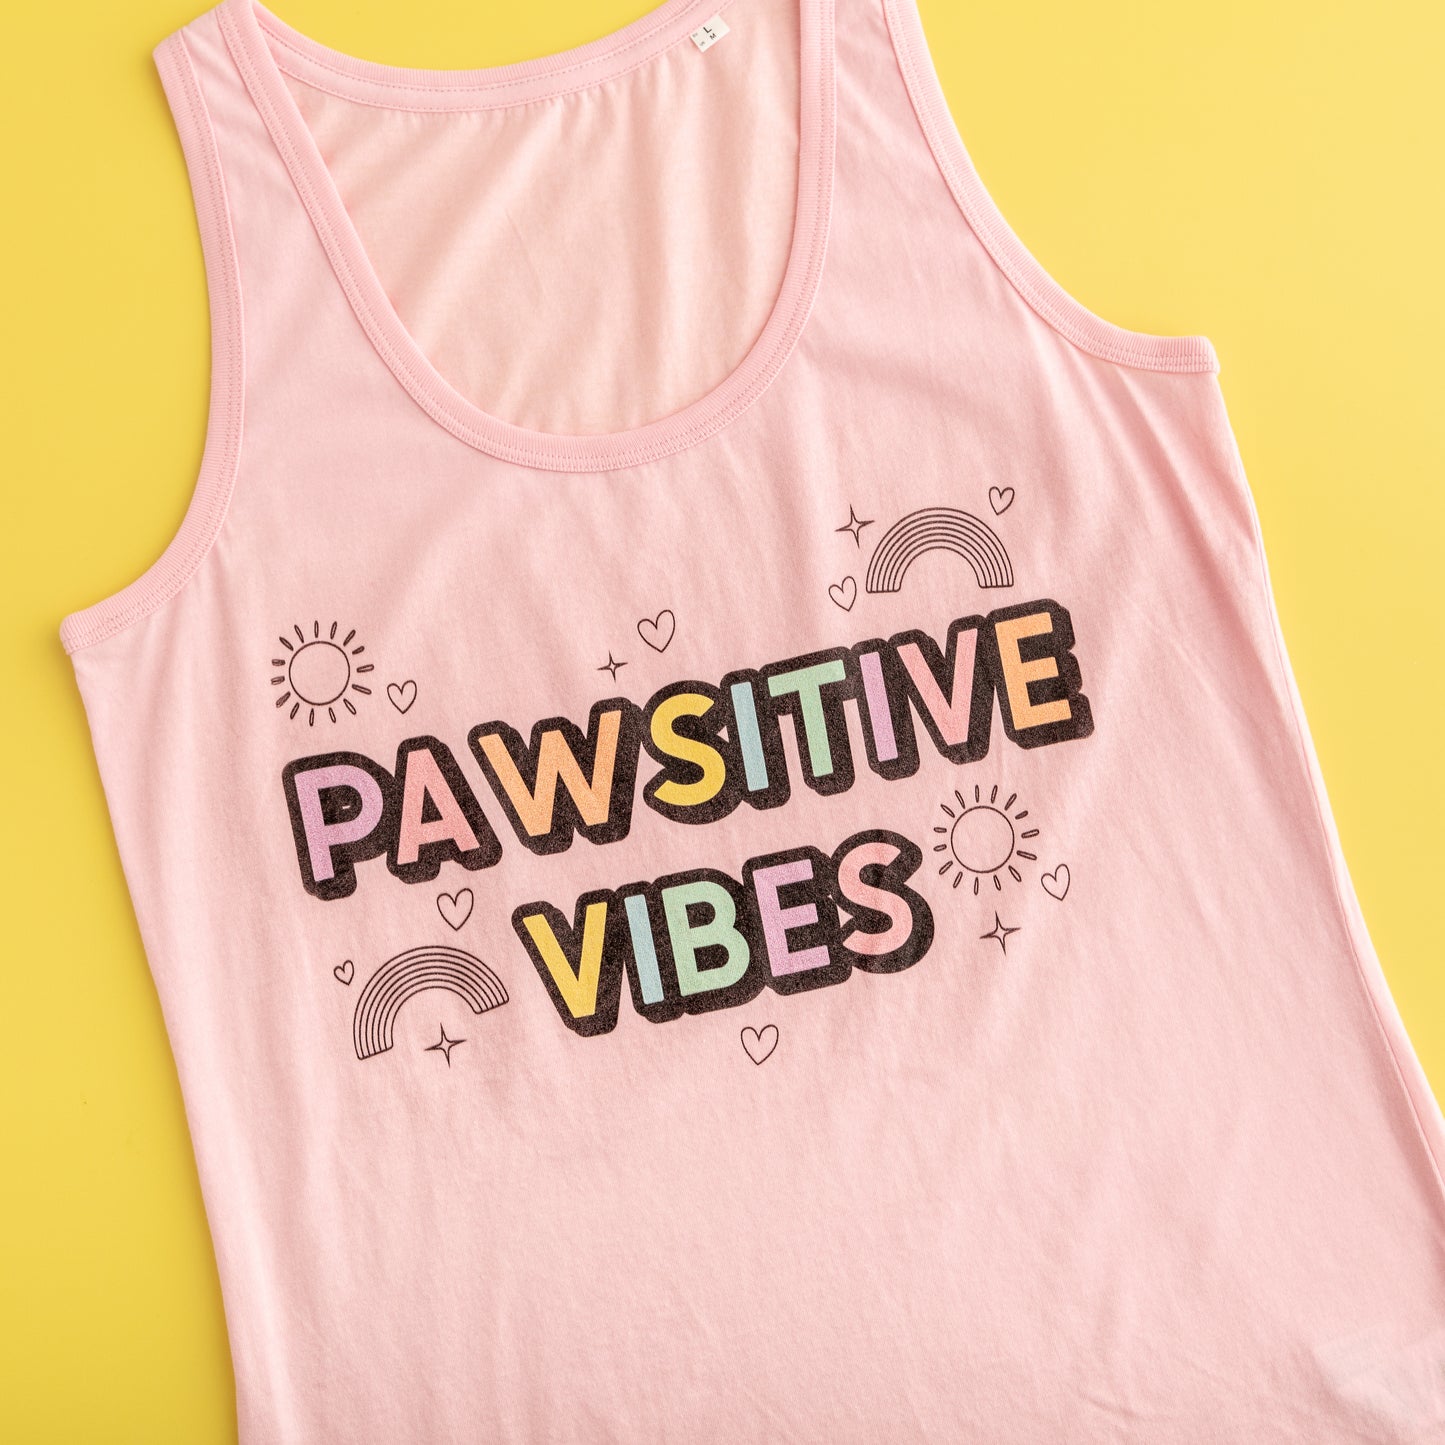 Organic Summer Vest Top - Pawsitive Vibes - Cotton Pink